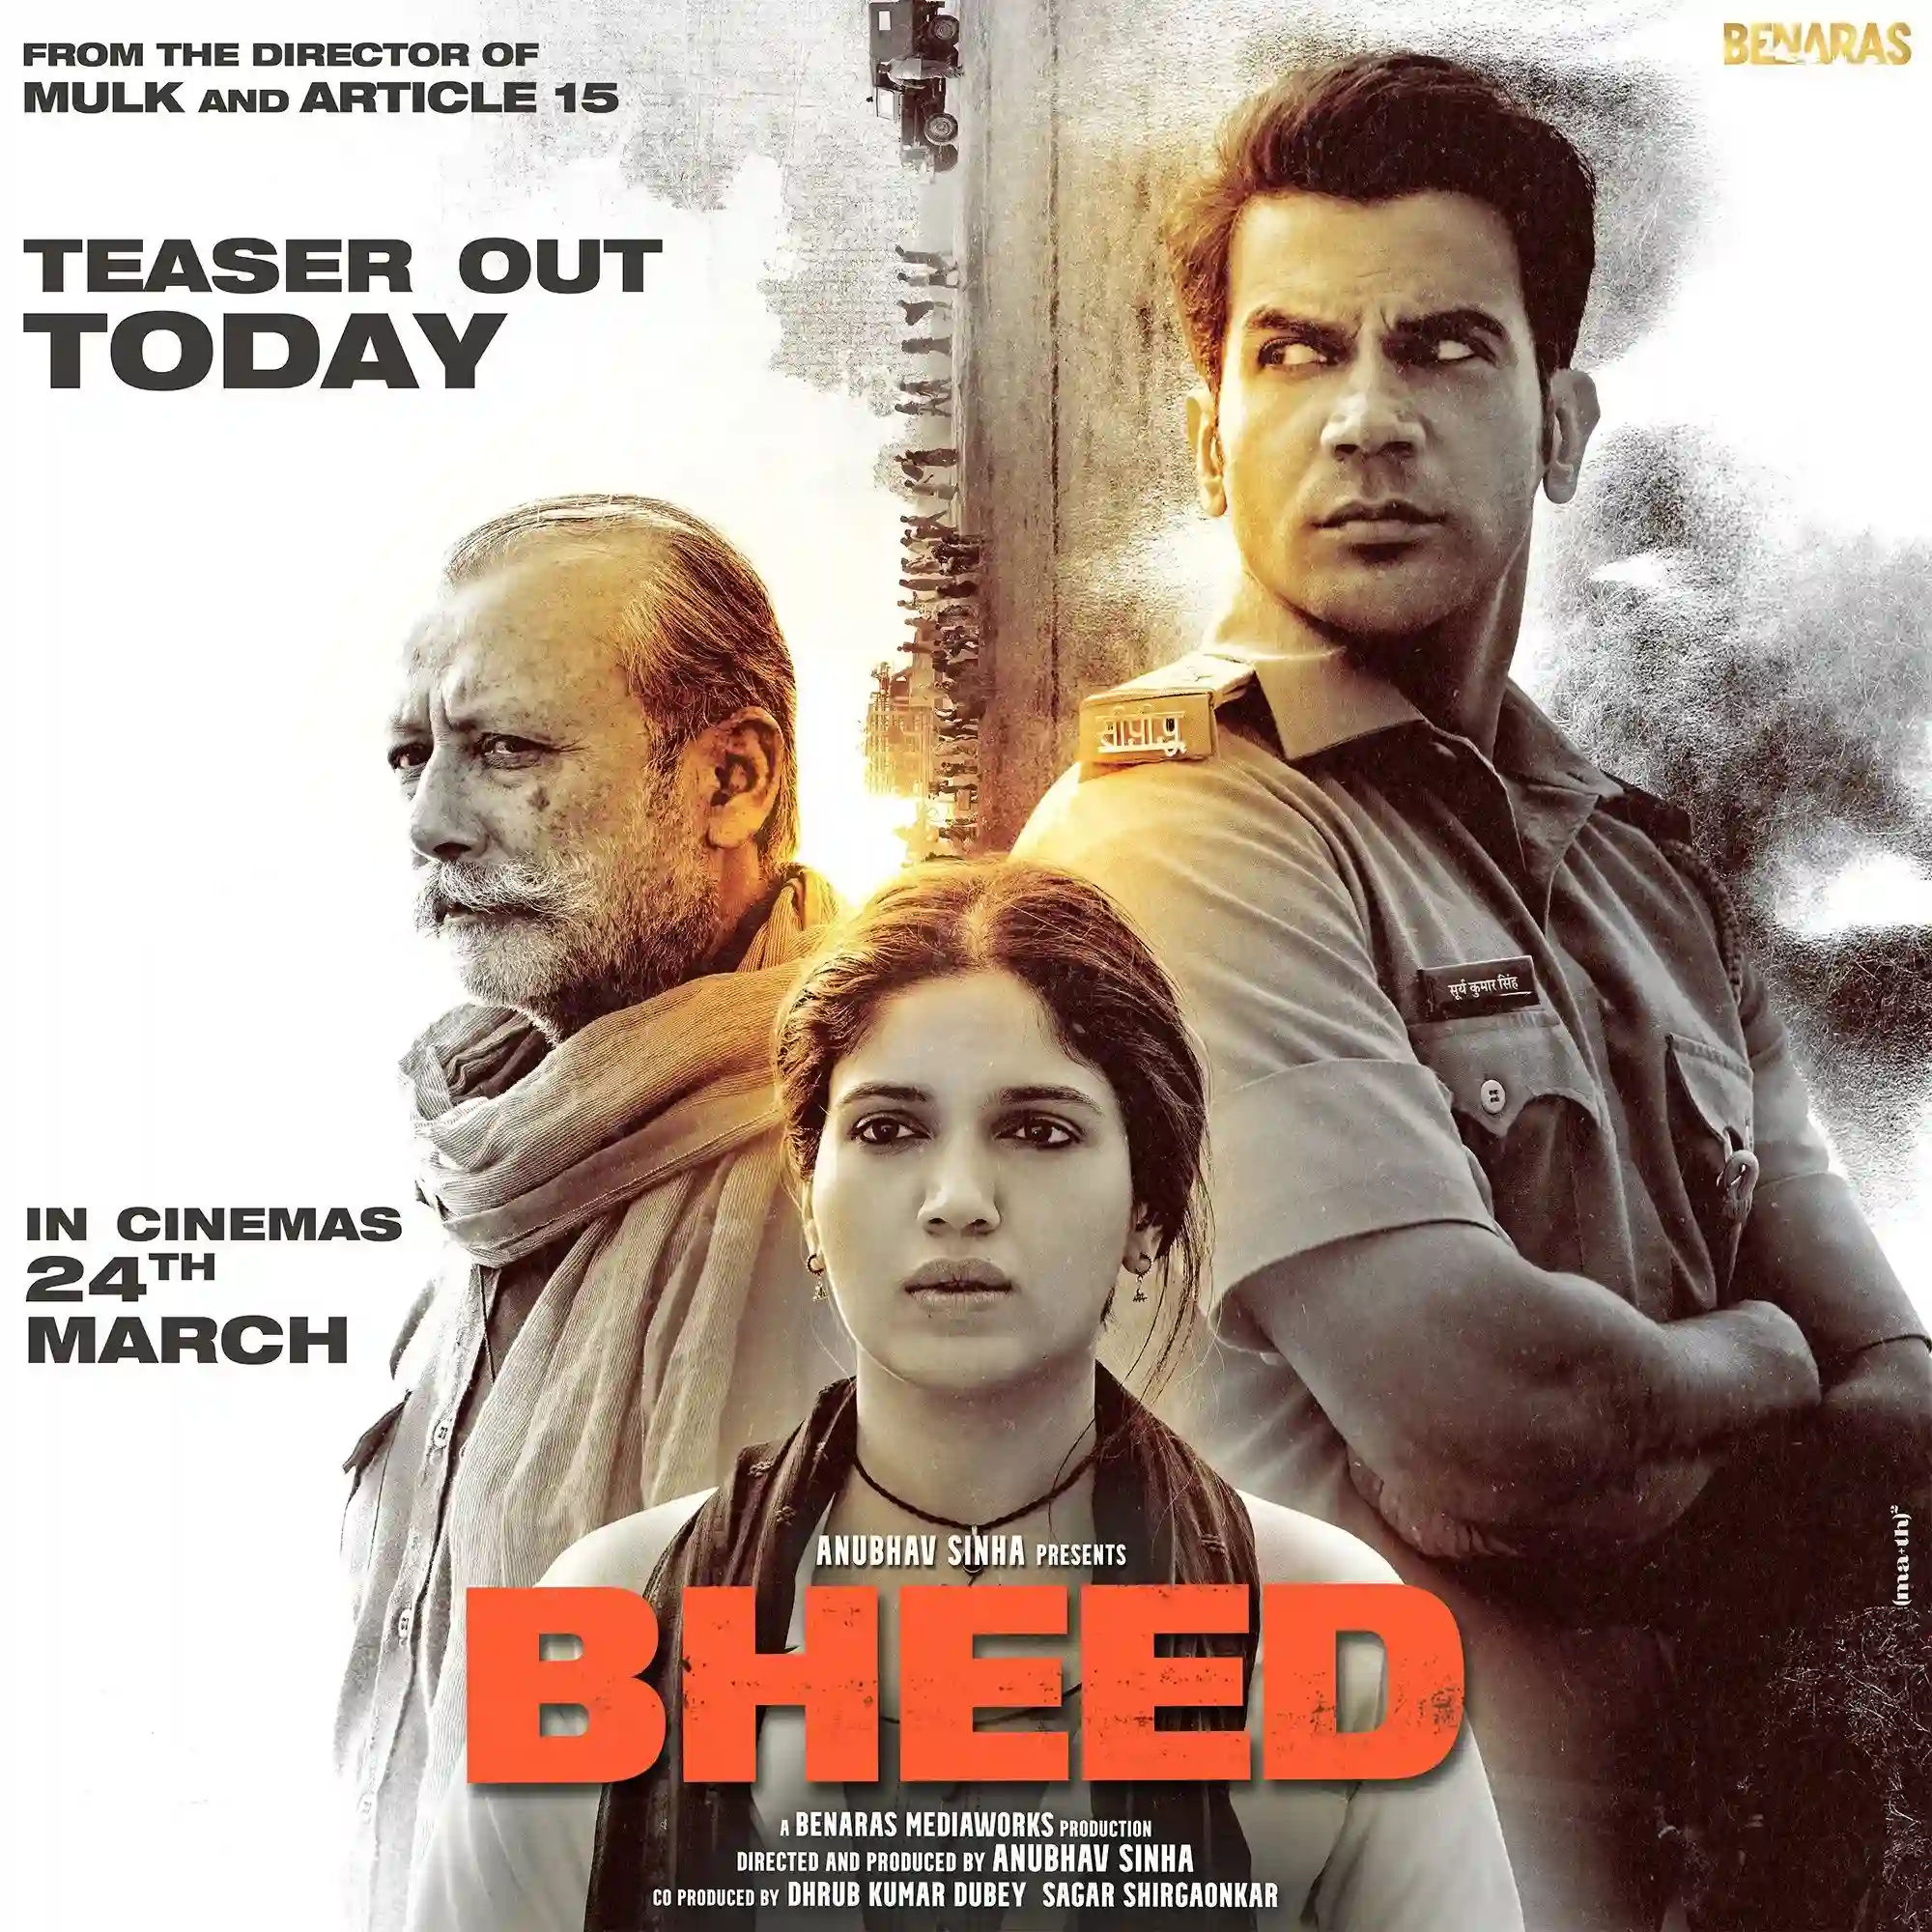 Bheed movie review: Rajkummar Rao and Bhumi Pednekar starrer is hard-hitting, but in bits and parts